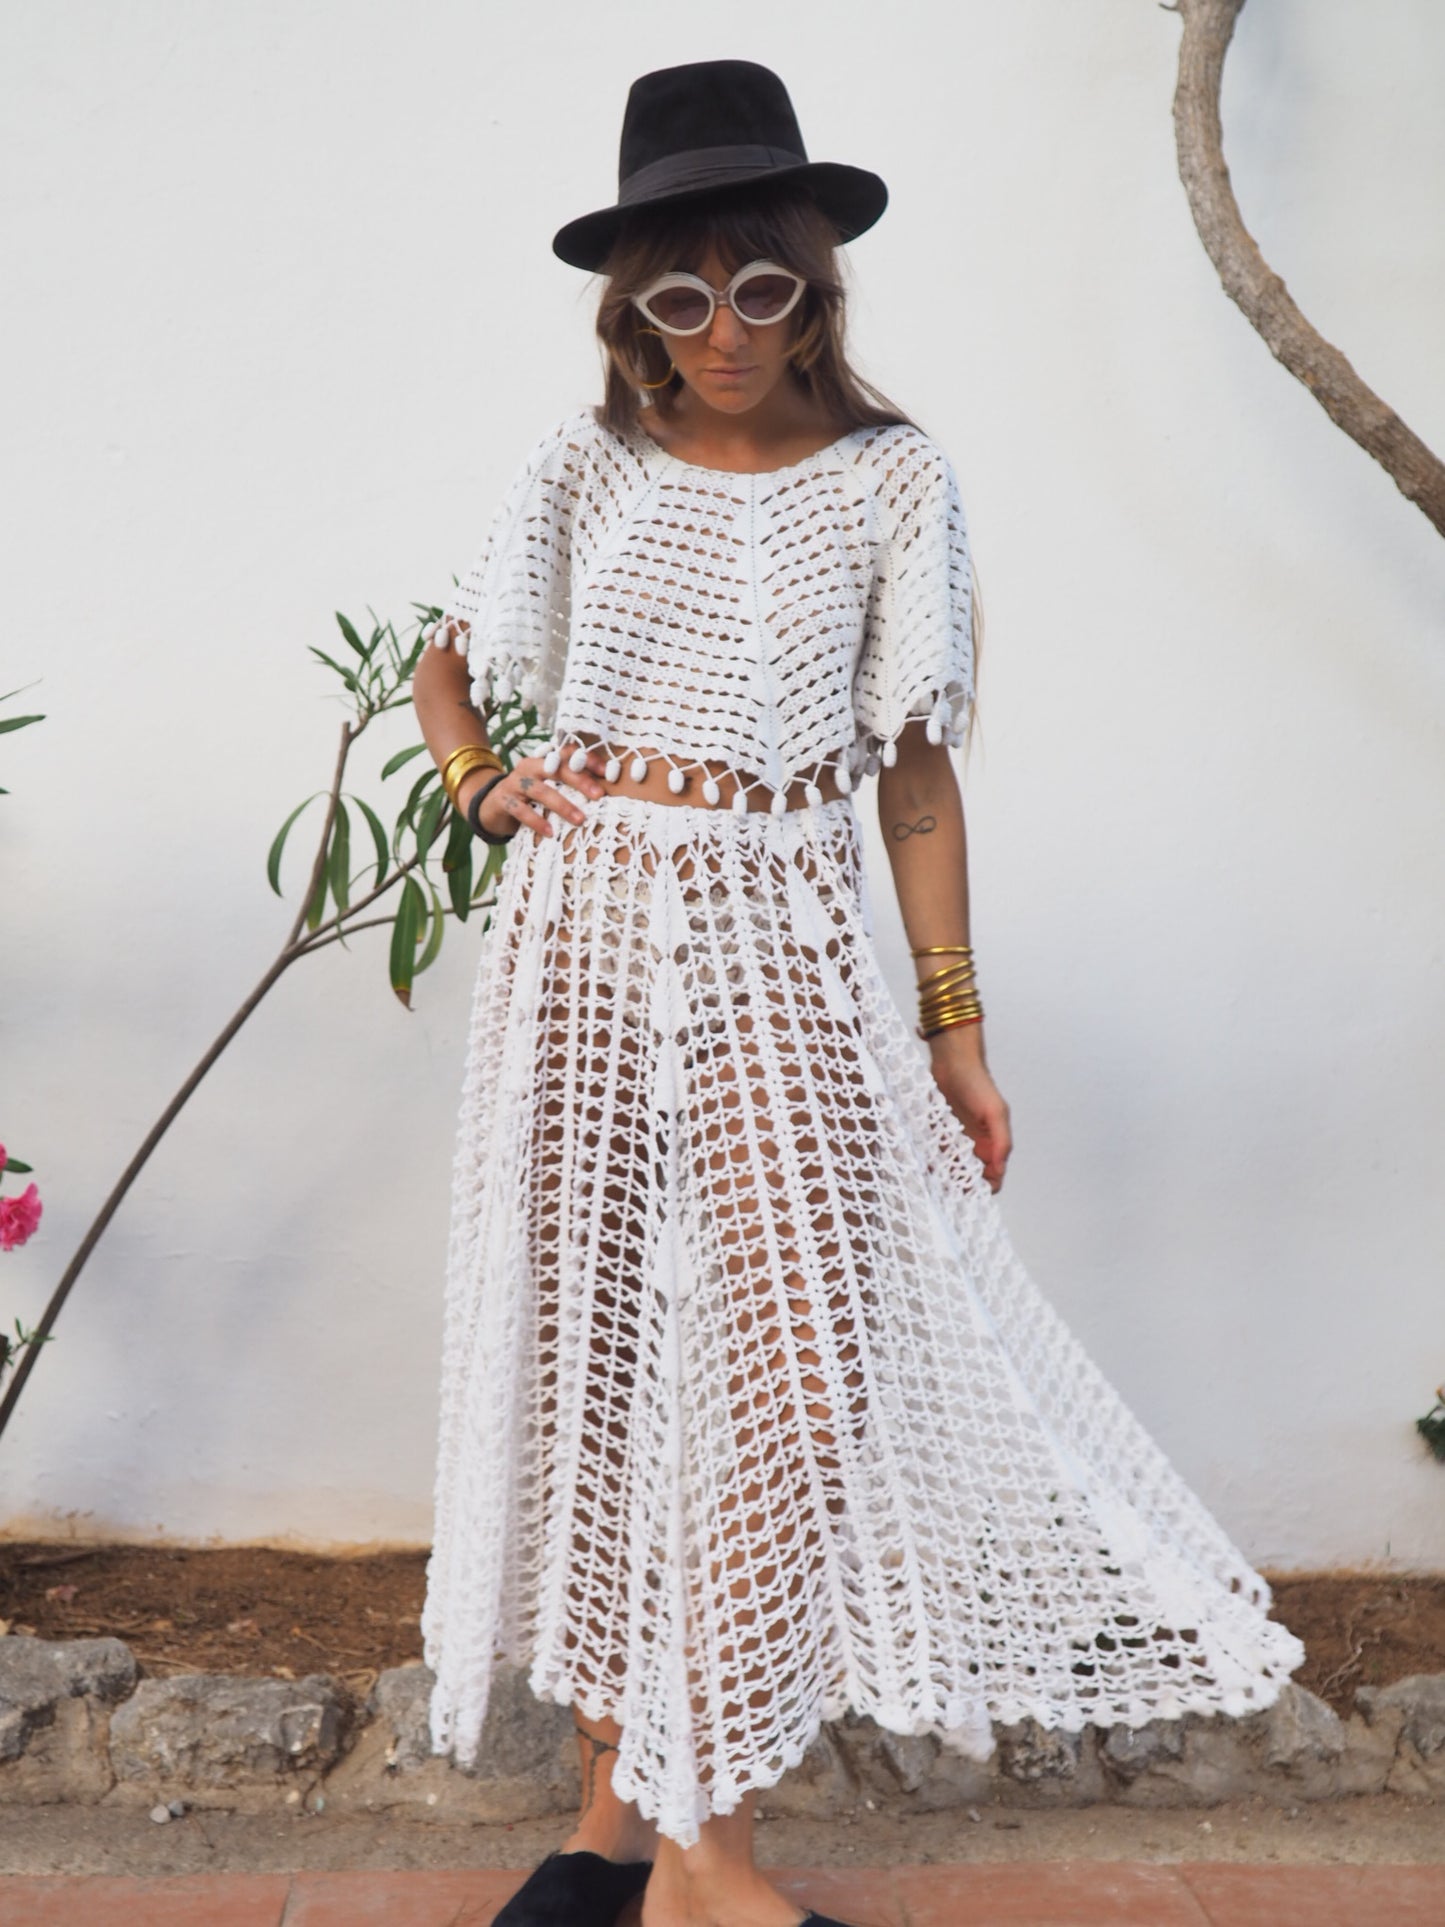 Amazing one off a kind white vintage crochet lace skirt up-cycled by Vagabond Ibiza